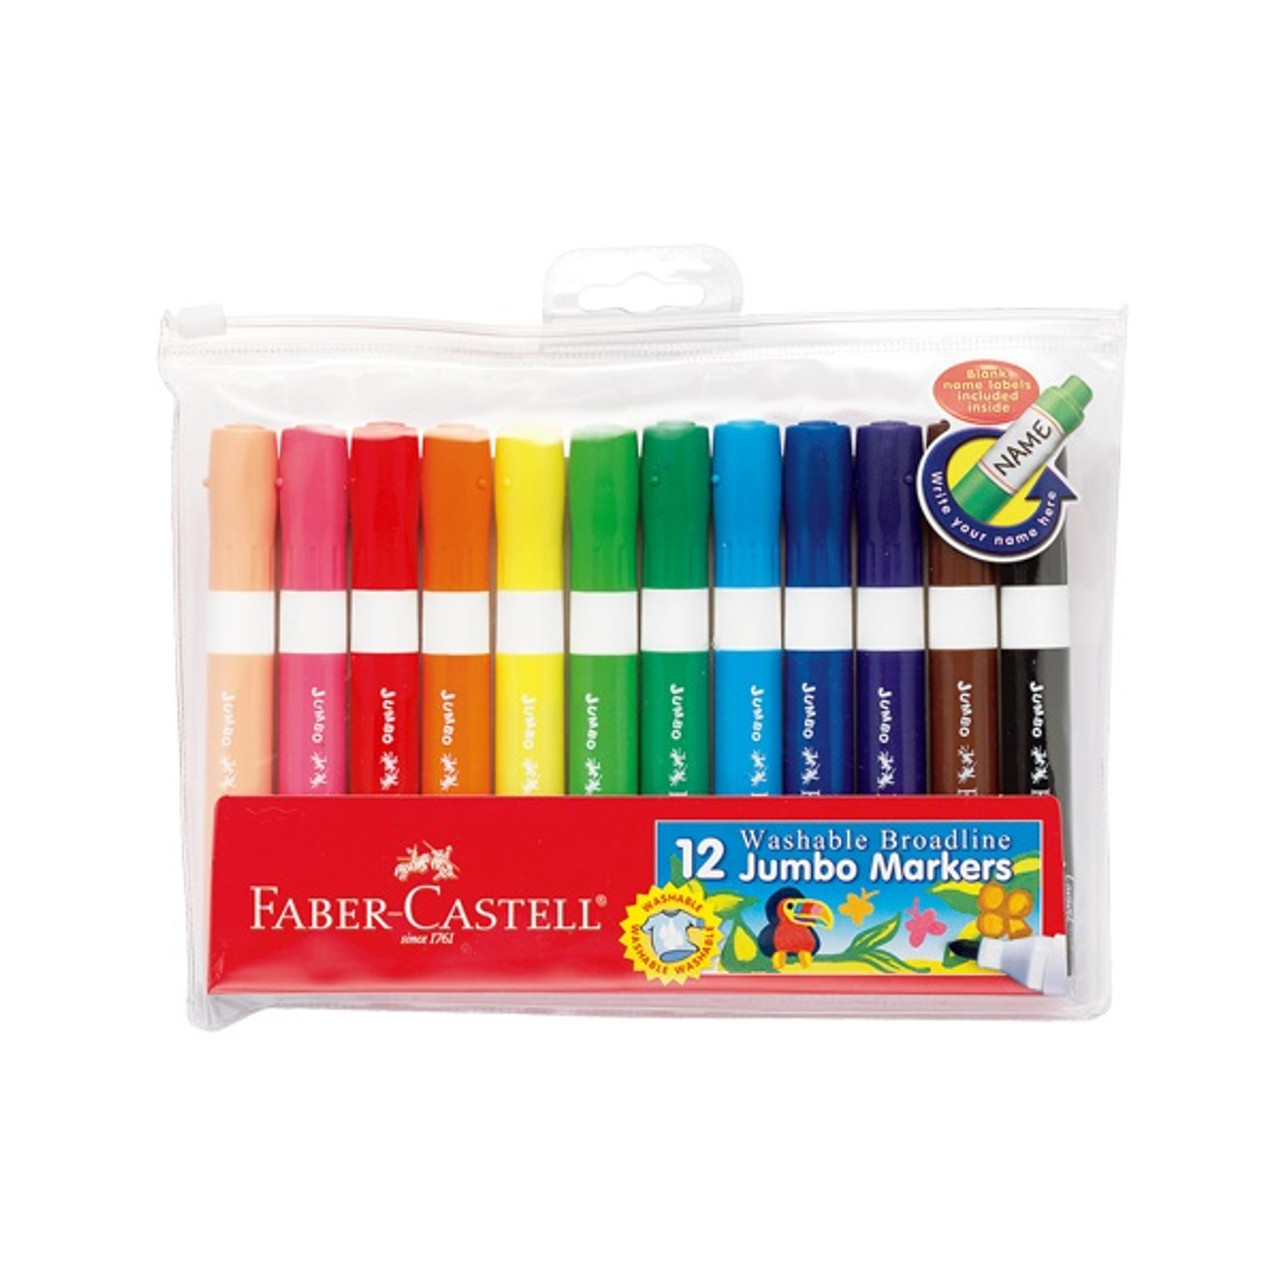 Faber-Castell Red Label Washable Broad Markers Set of 12 - Wet